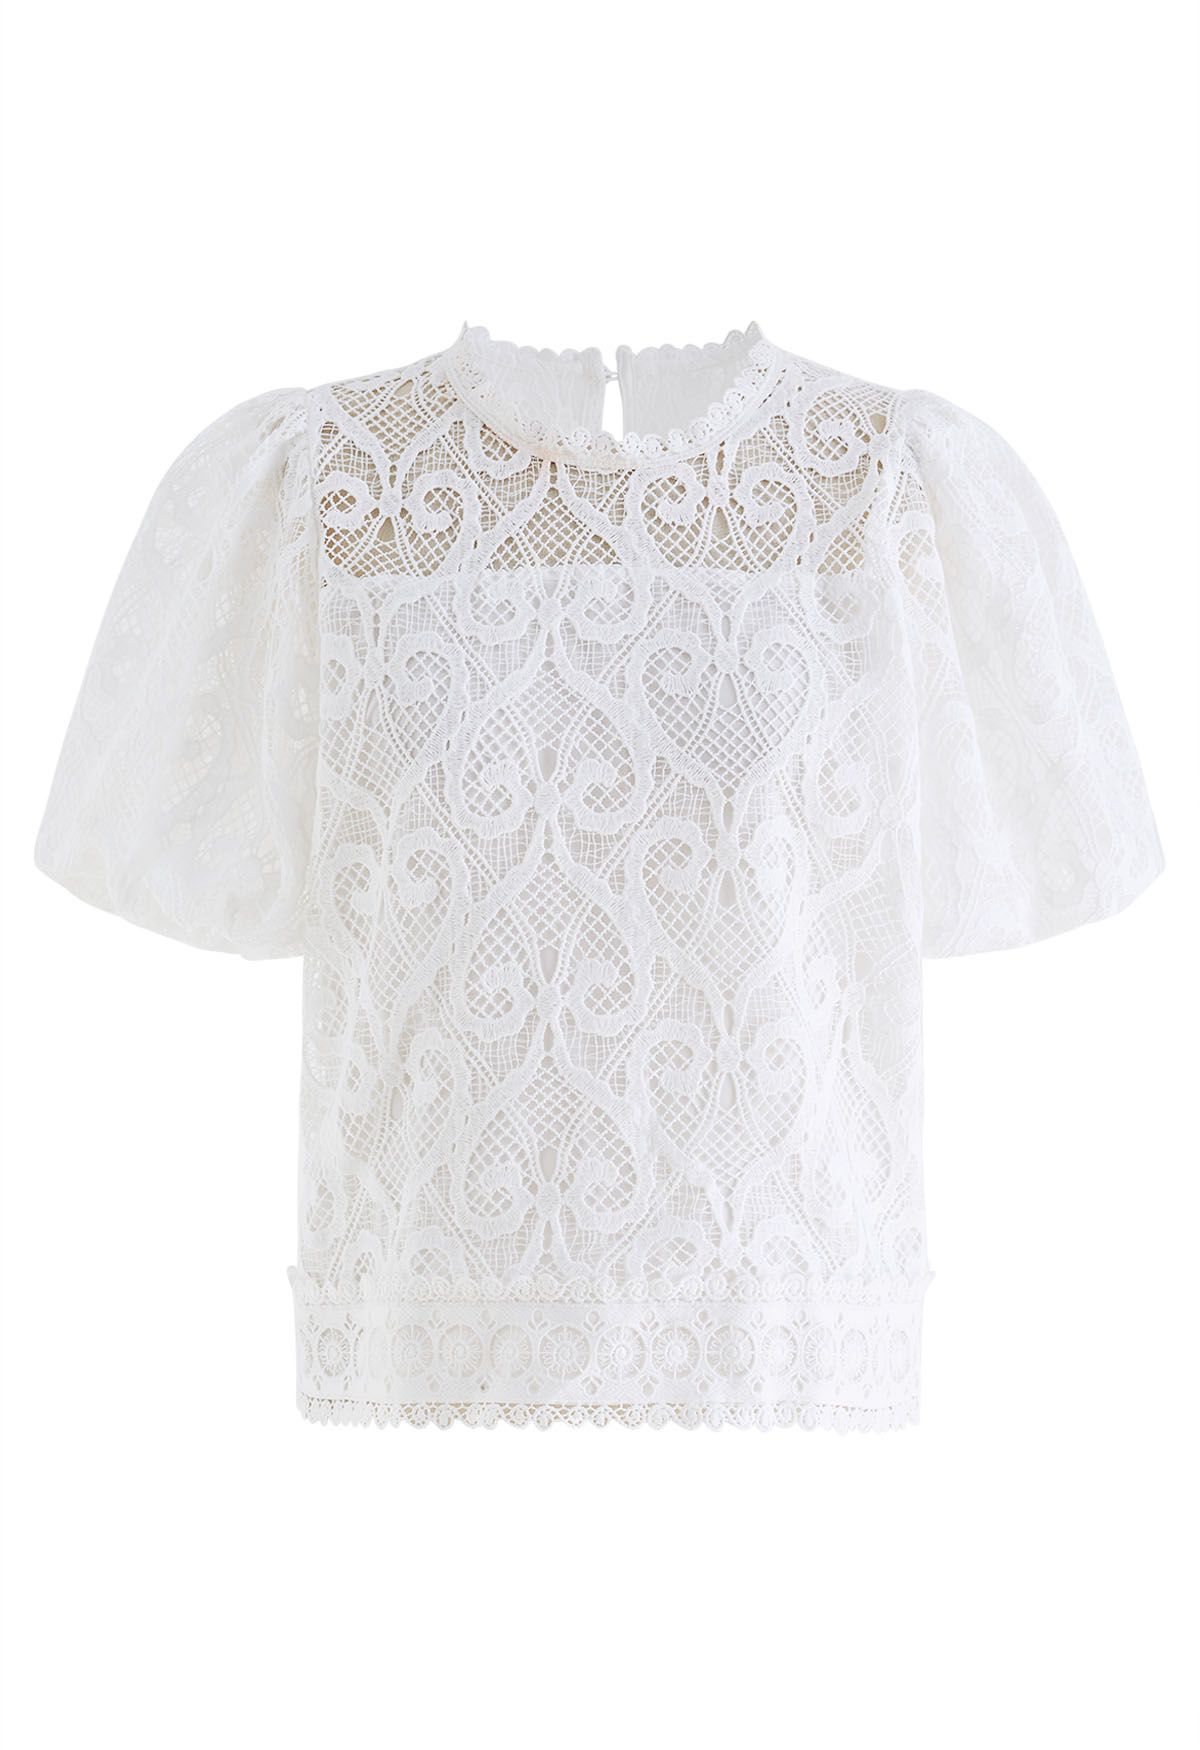 Heart Pattern Cutwork Lace Top in White - Retro, Indie and Unique Fashion